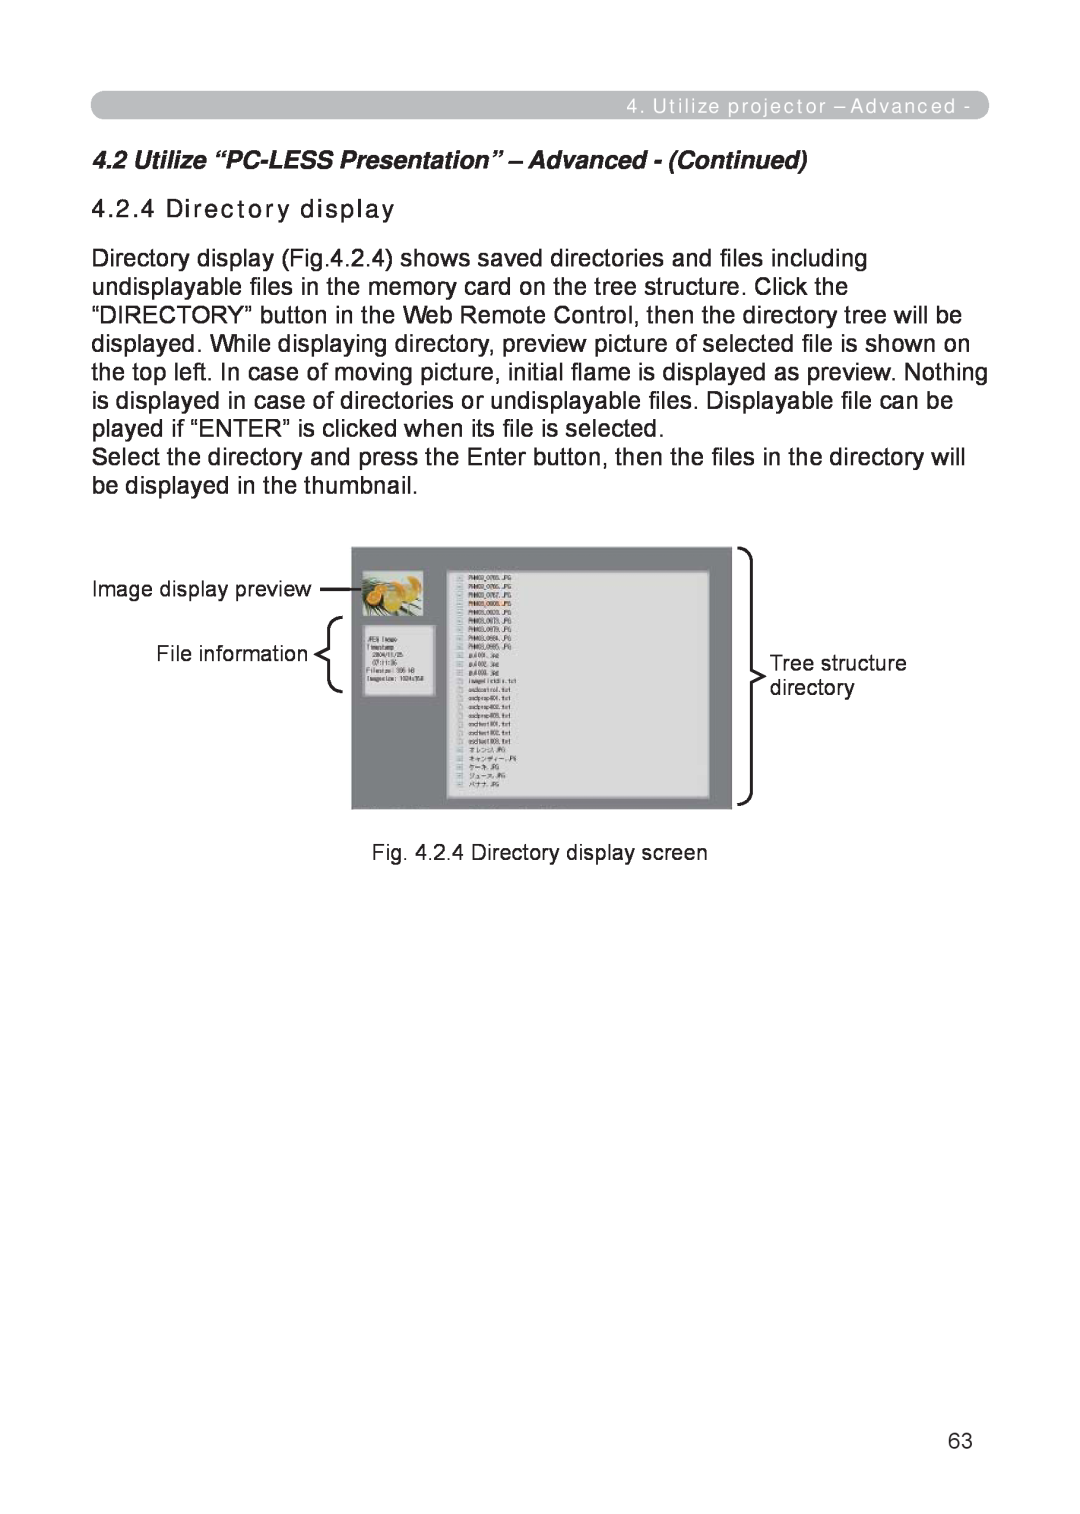 3M X62w manual Image display preview, File information, directory, 2.4 Directory display screen 